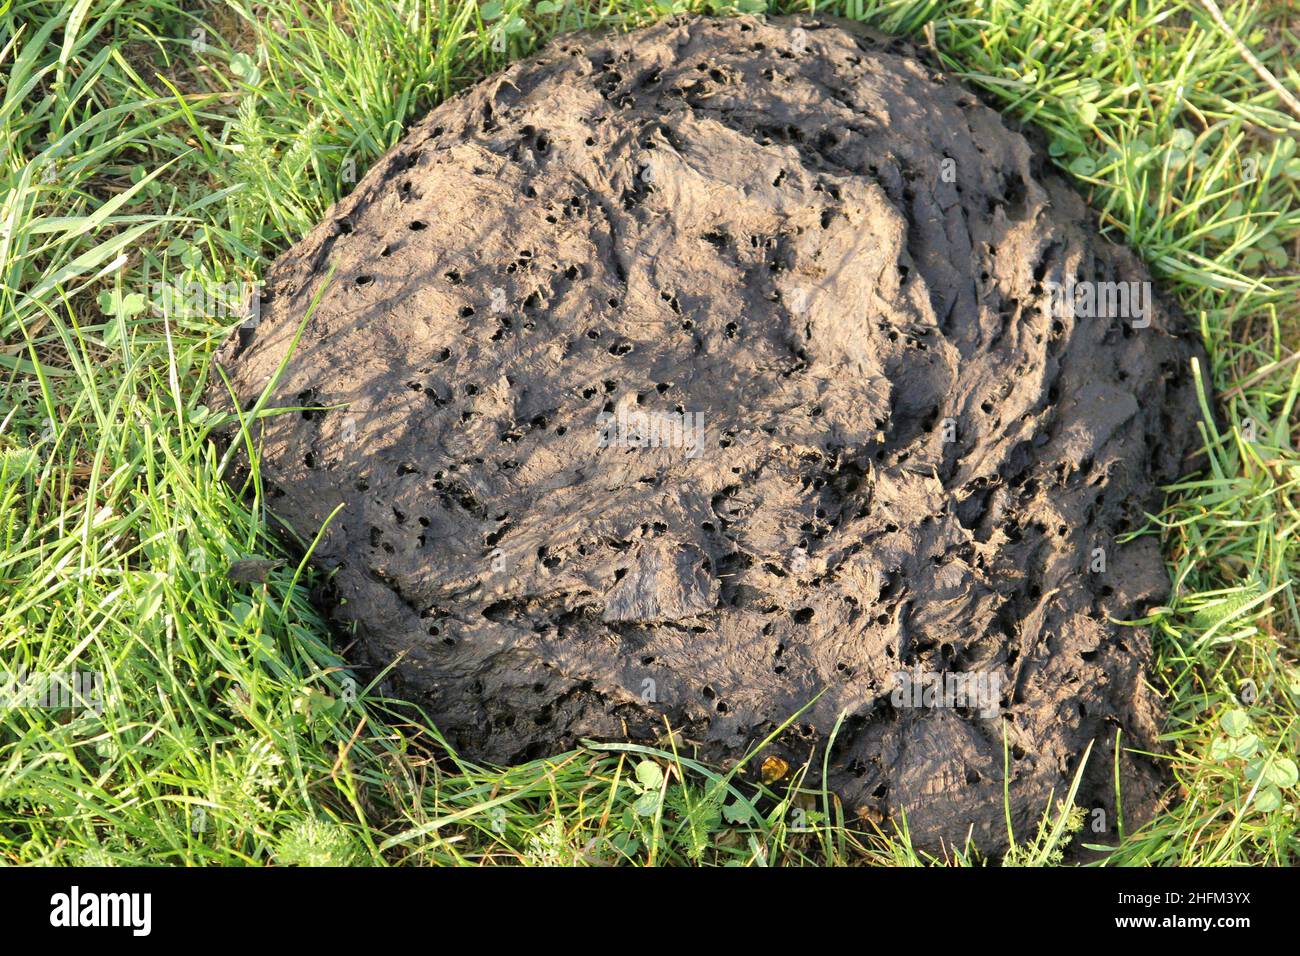 The detail of the big cow excrement lying in the grass on the green field. Stock Photo